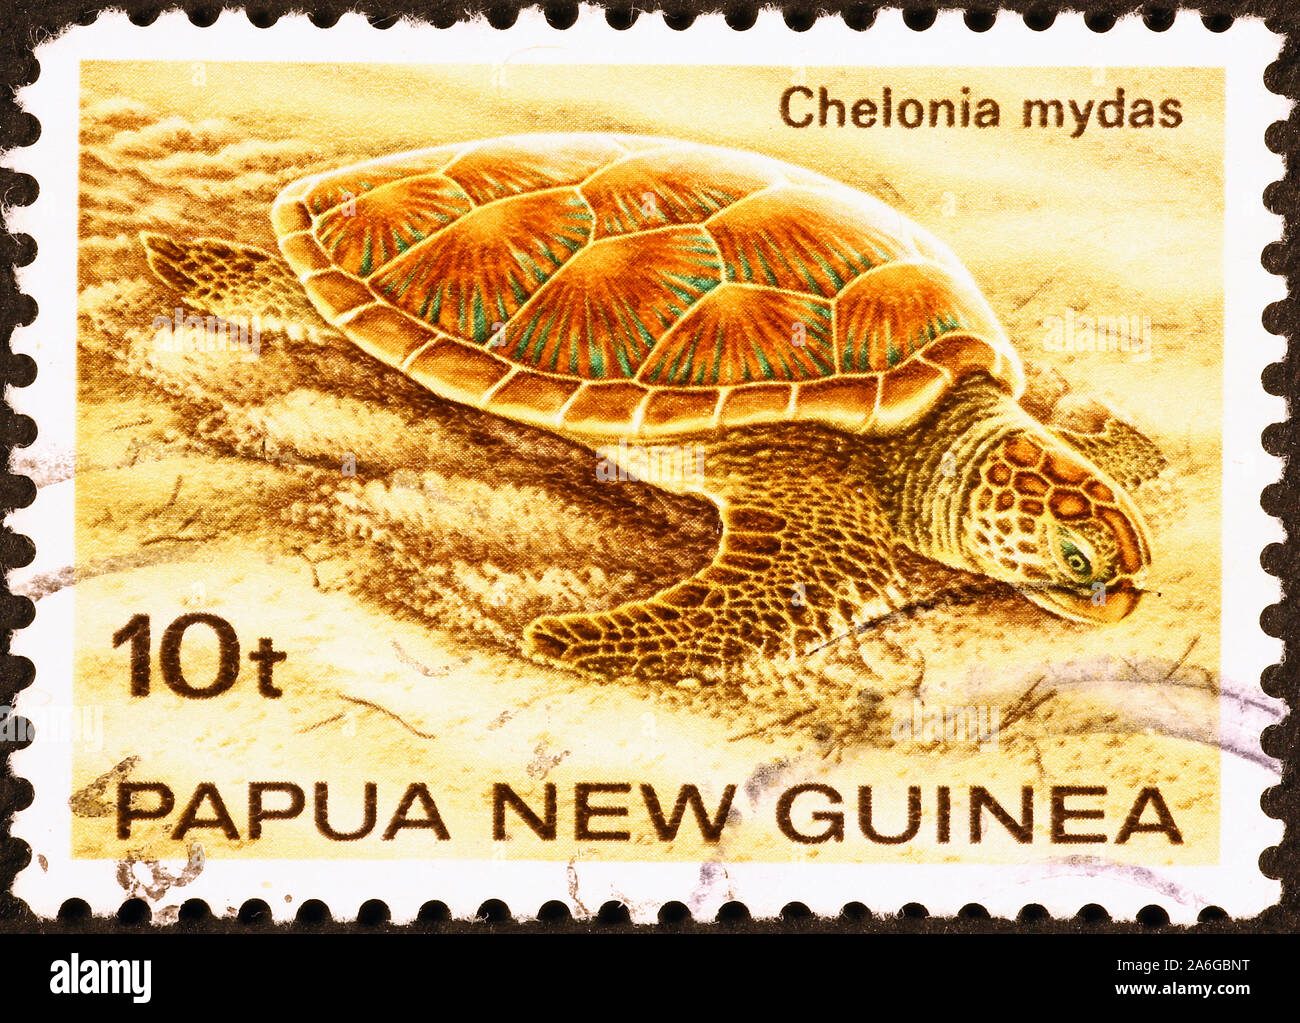 Turtle on postage stamp pf Papua New Guinea Stock Photo